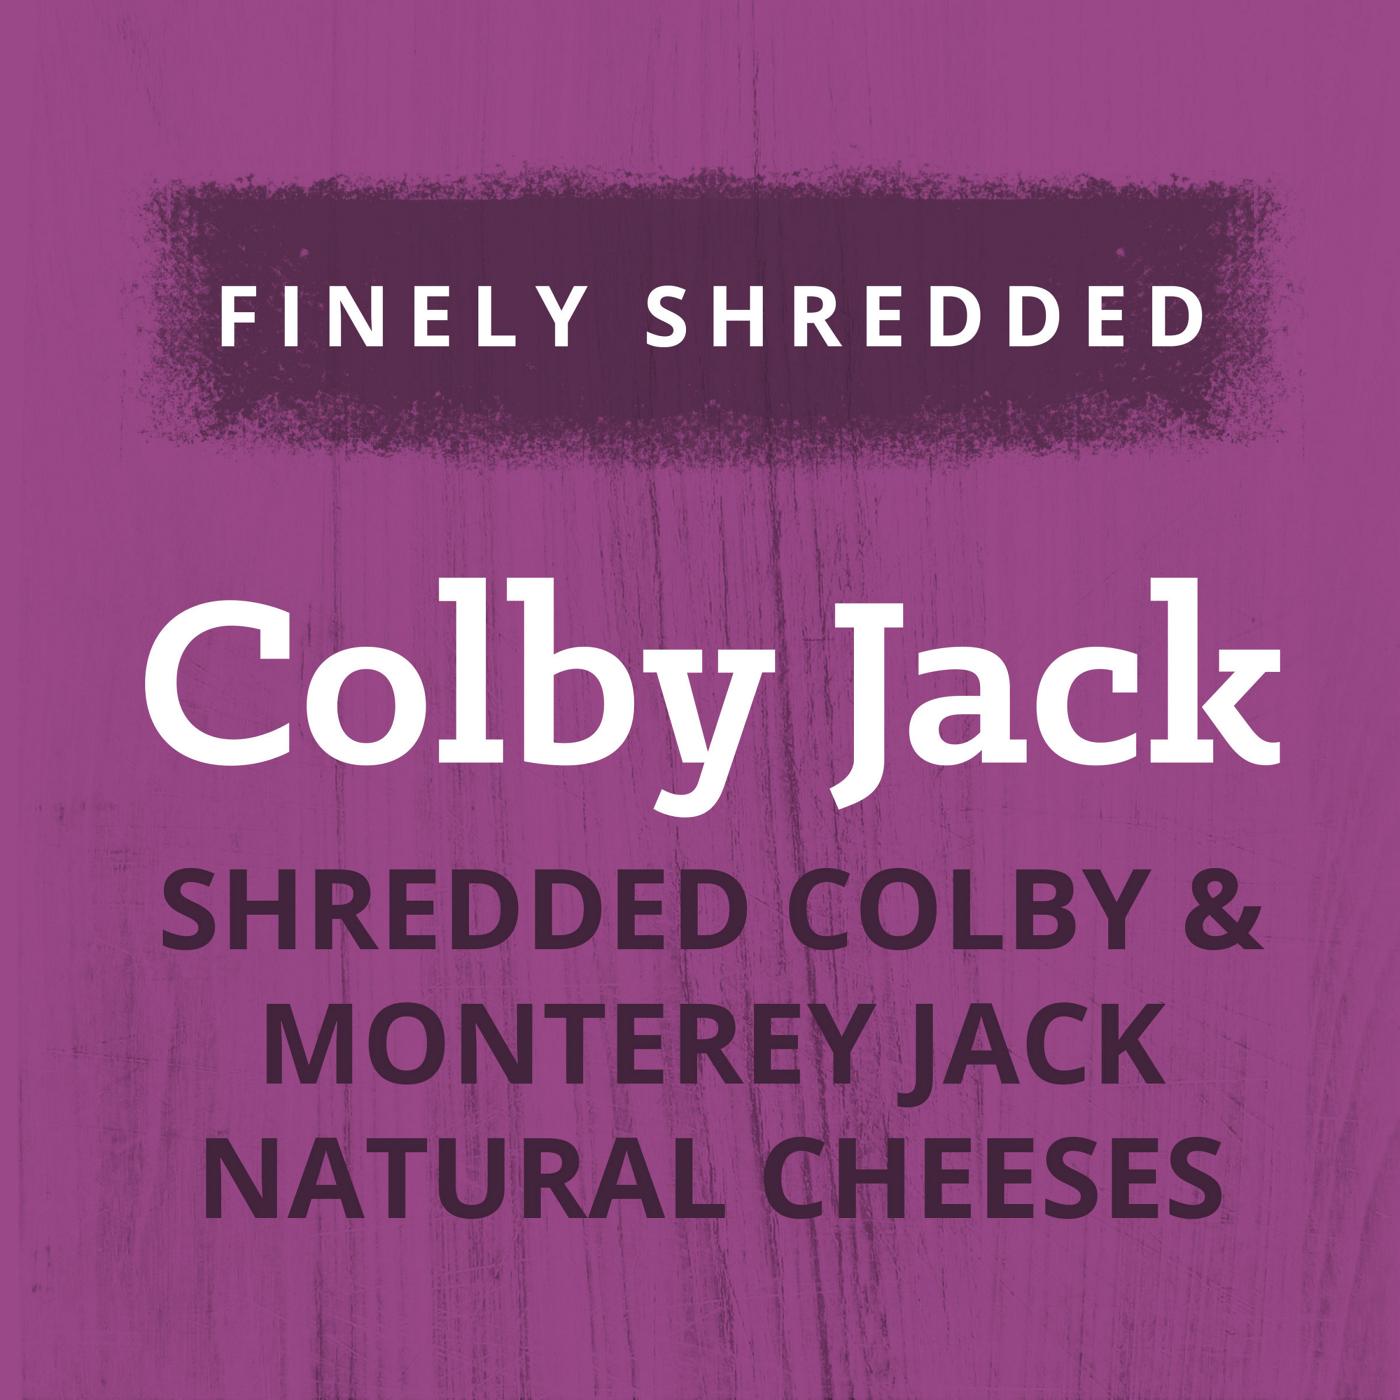 Kraft Colby & Monterey Jack Finely Shredded Cheese; image 4 of 4